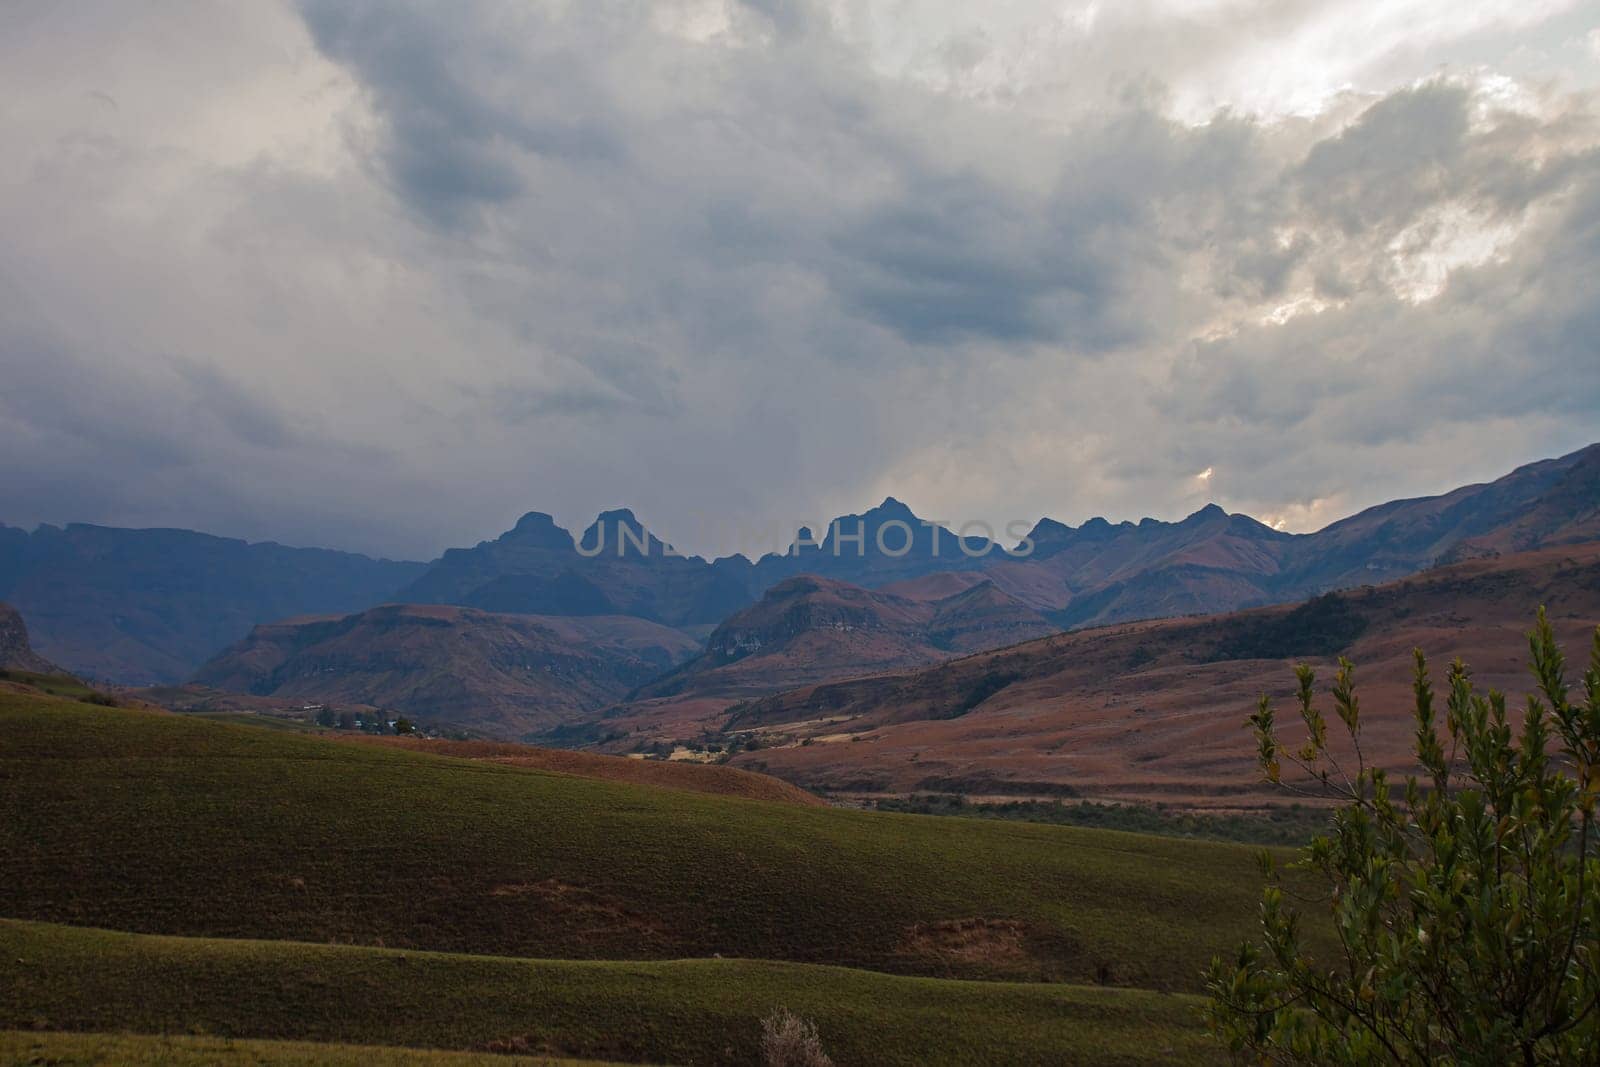 Sunset at Cathedral Peak in the Drakensberg Mountains. KwaZulu-Natal Province, South Africa